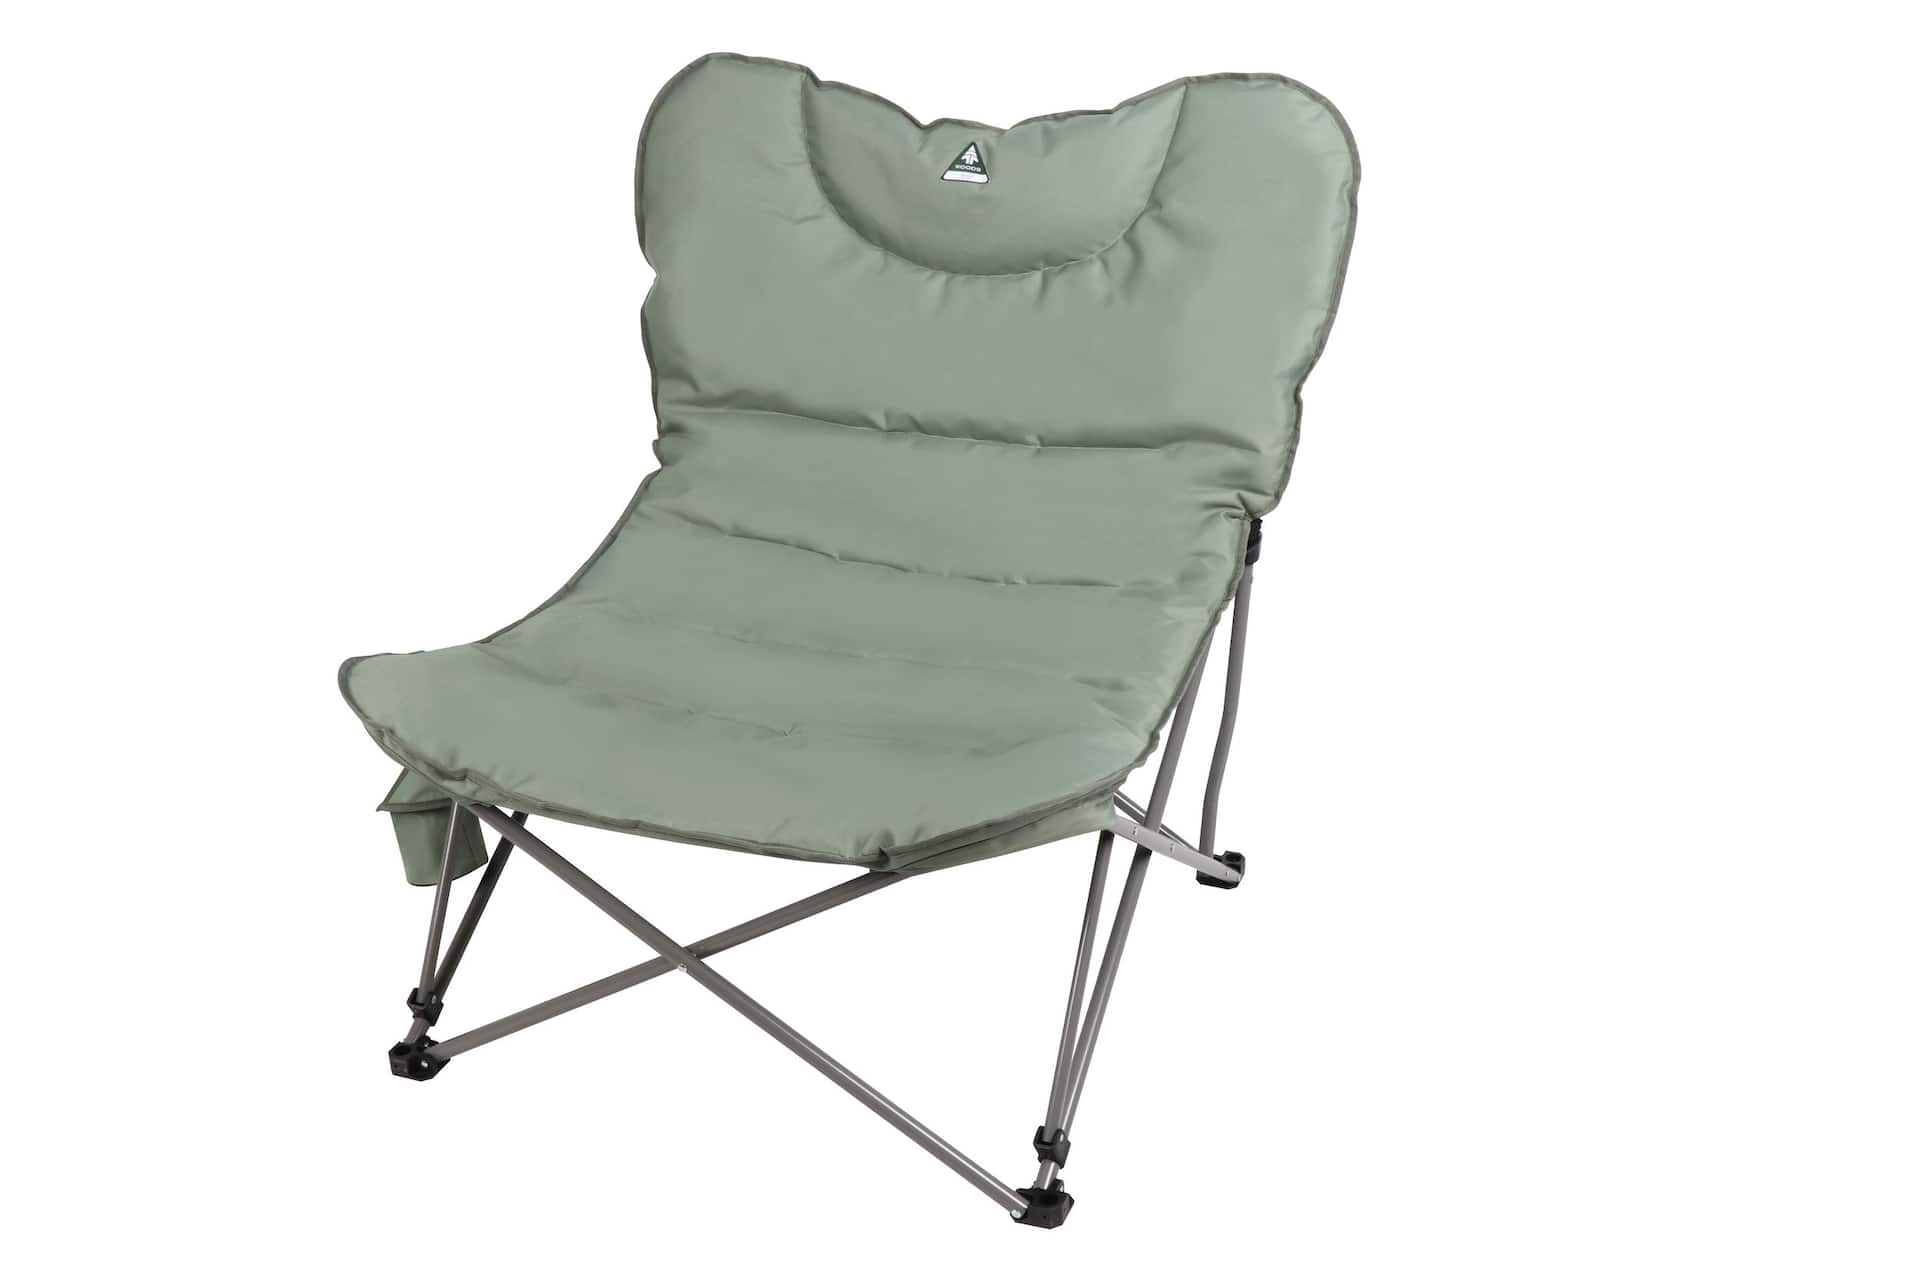 https://media-www.canadiantire.ca/product/playing/camping/camping-furniture/0763782/woods-mammoth-folding-padded-camping-chair-sea-spray-9b45f315-a292-4325-9193-c0ff90c3bfc5-jpgrendition.jpg